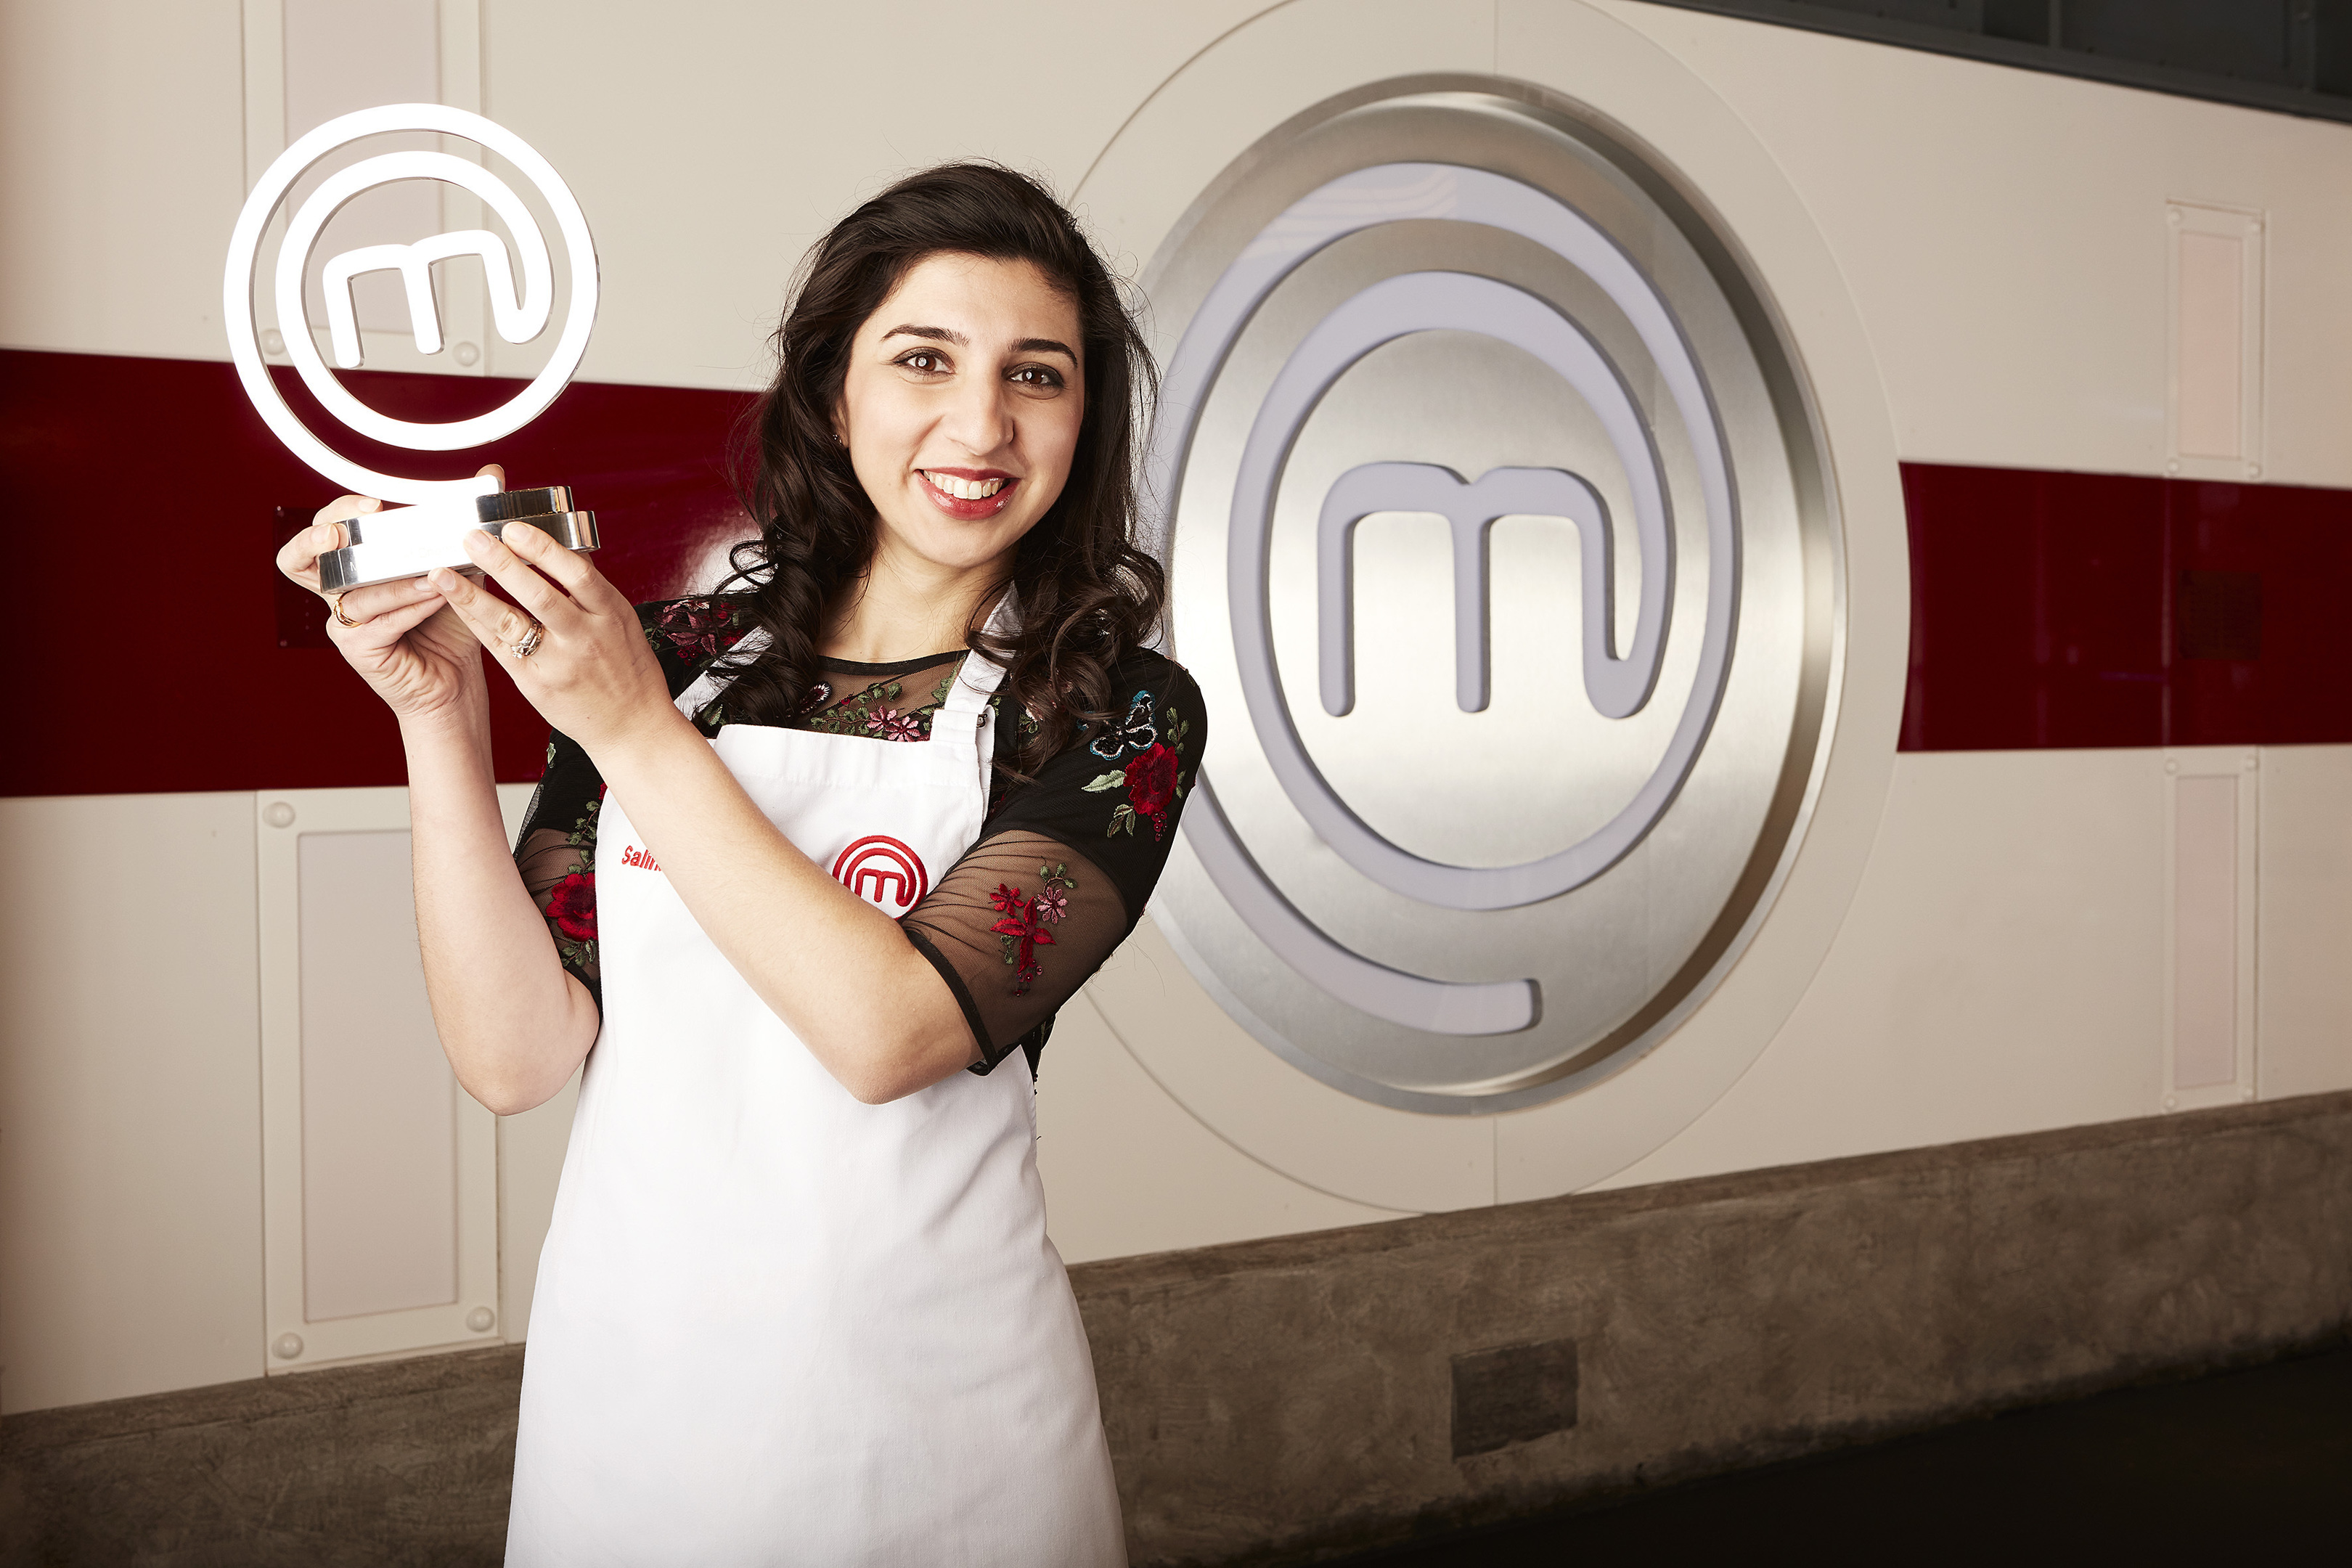 Saliha Mahmood-Ahmed, who has been named the winner of the 2017 series of the BBC programme Masterchef. (BBC/PA Wire)